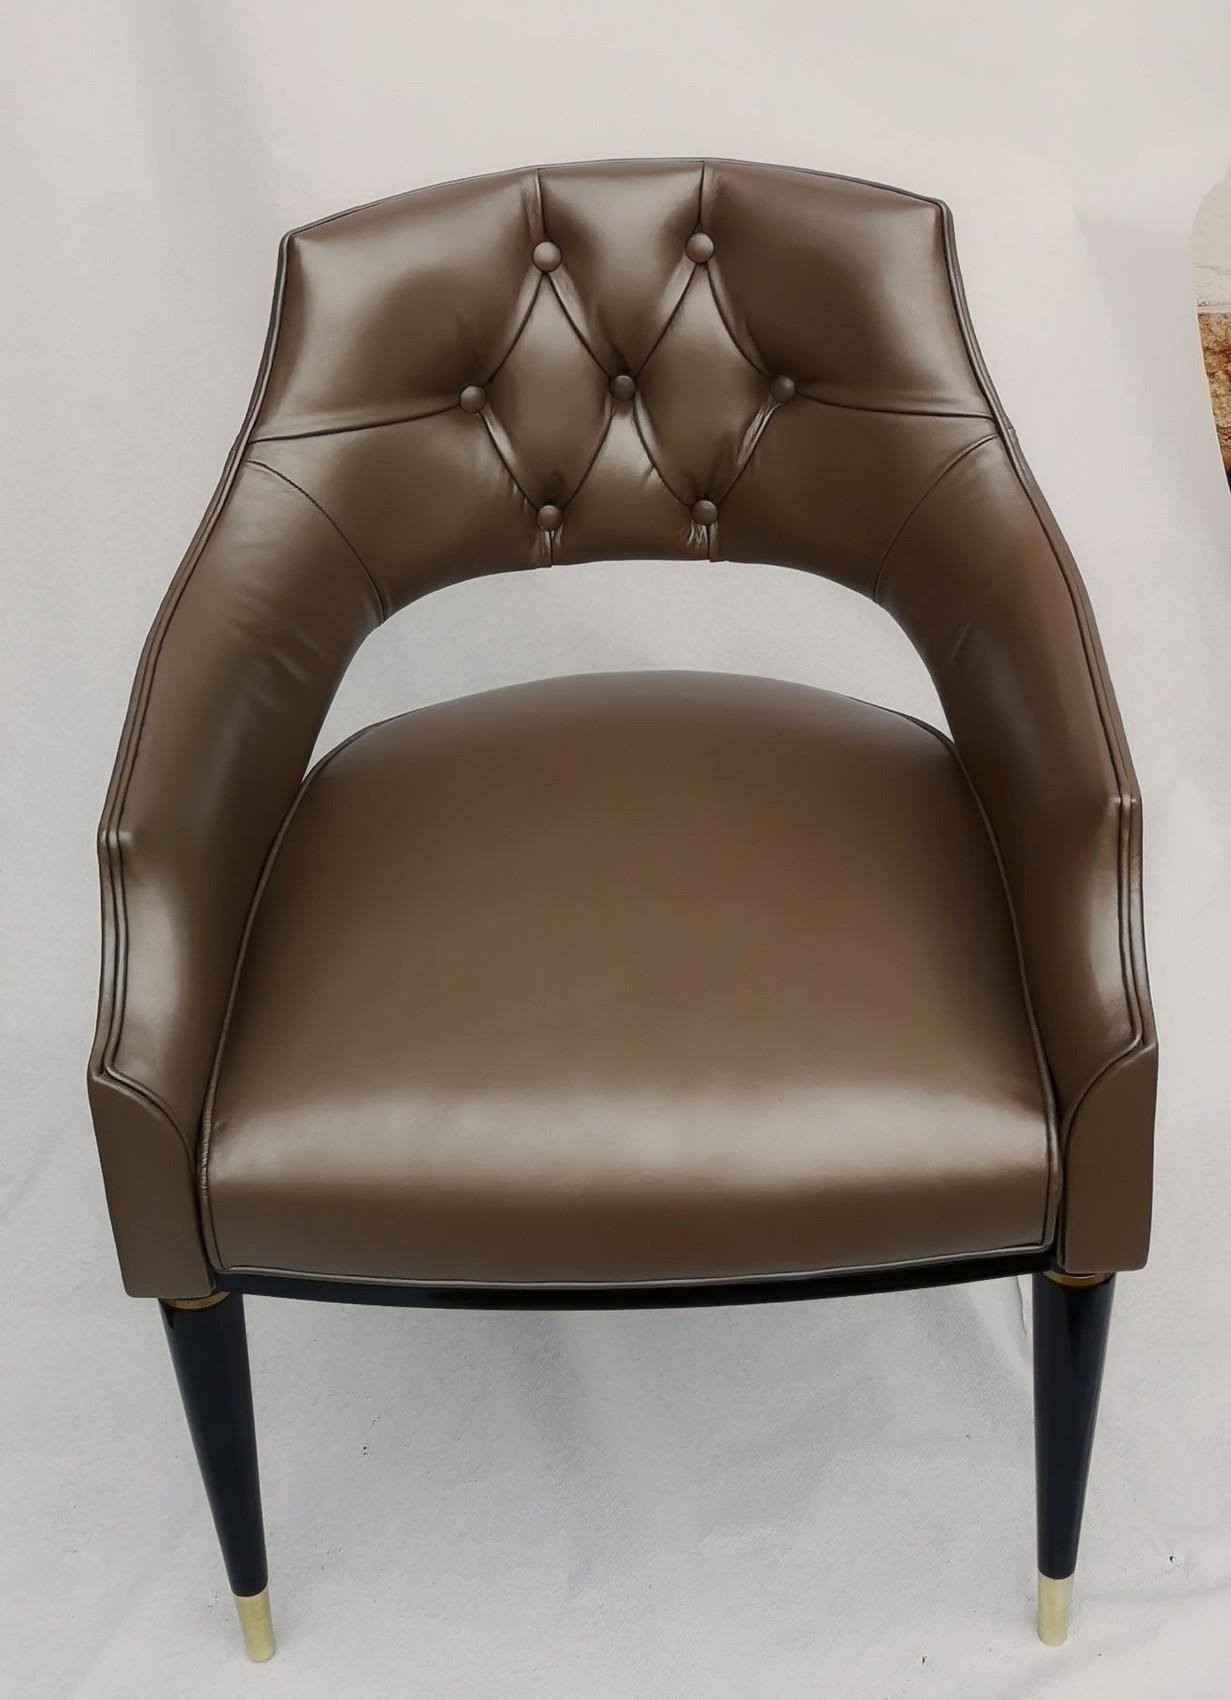 Contemporary Dining Armchair, Tufted Fiore Italian Leather, Midcentury Style, Luxury Details